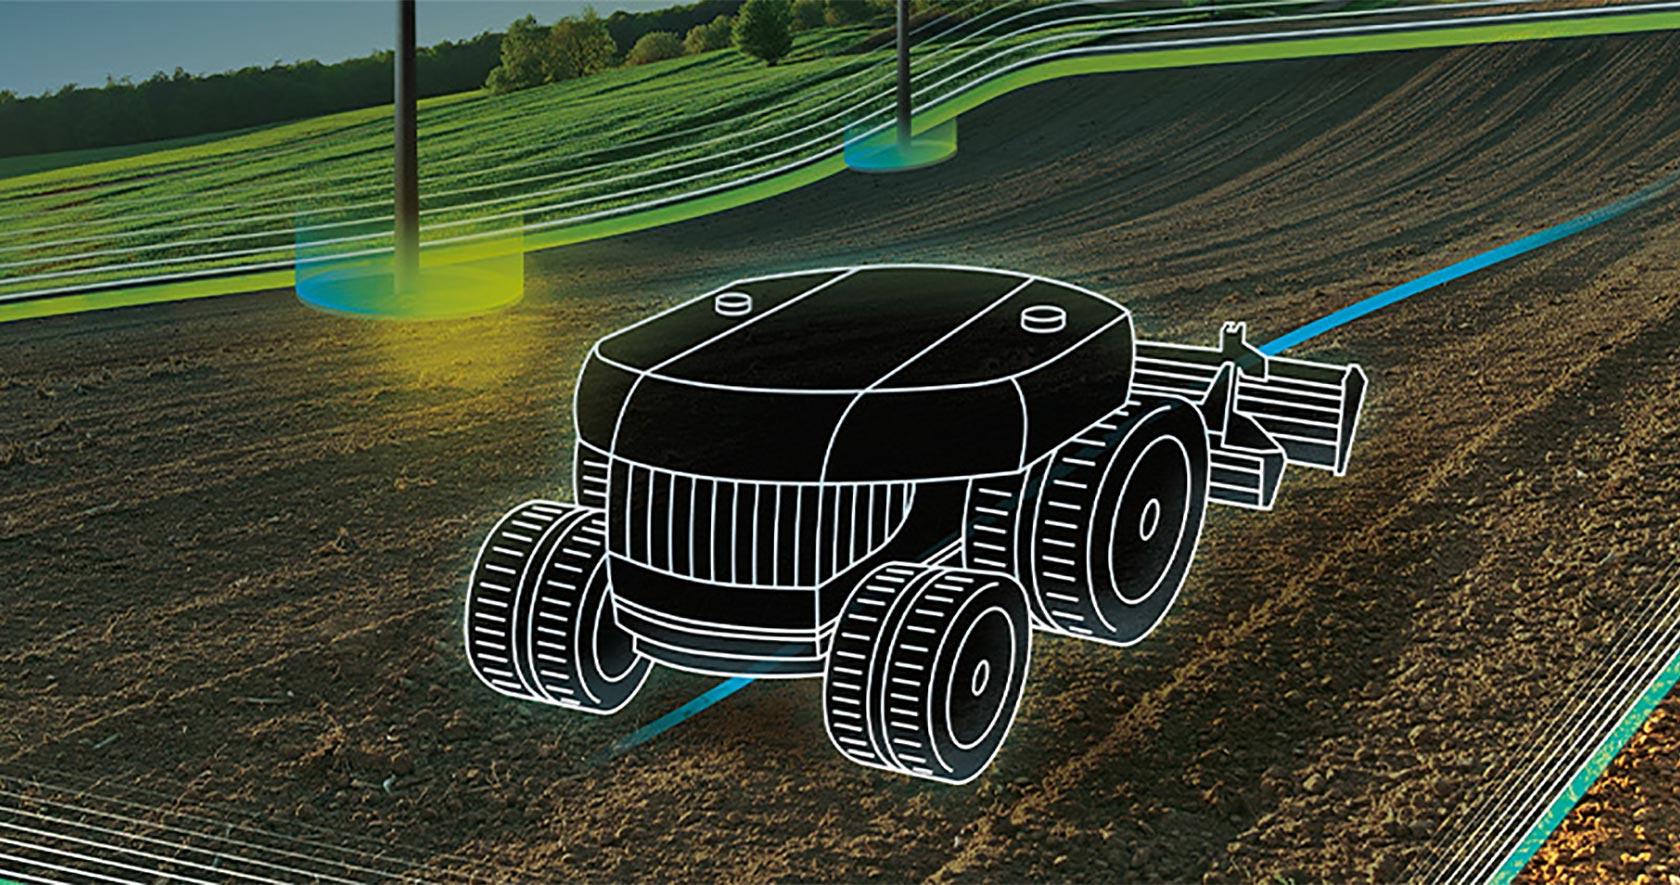 Outline drawing of an autonomous farm implement in a field